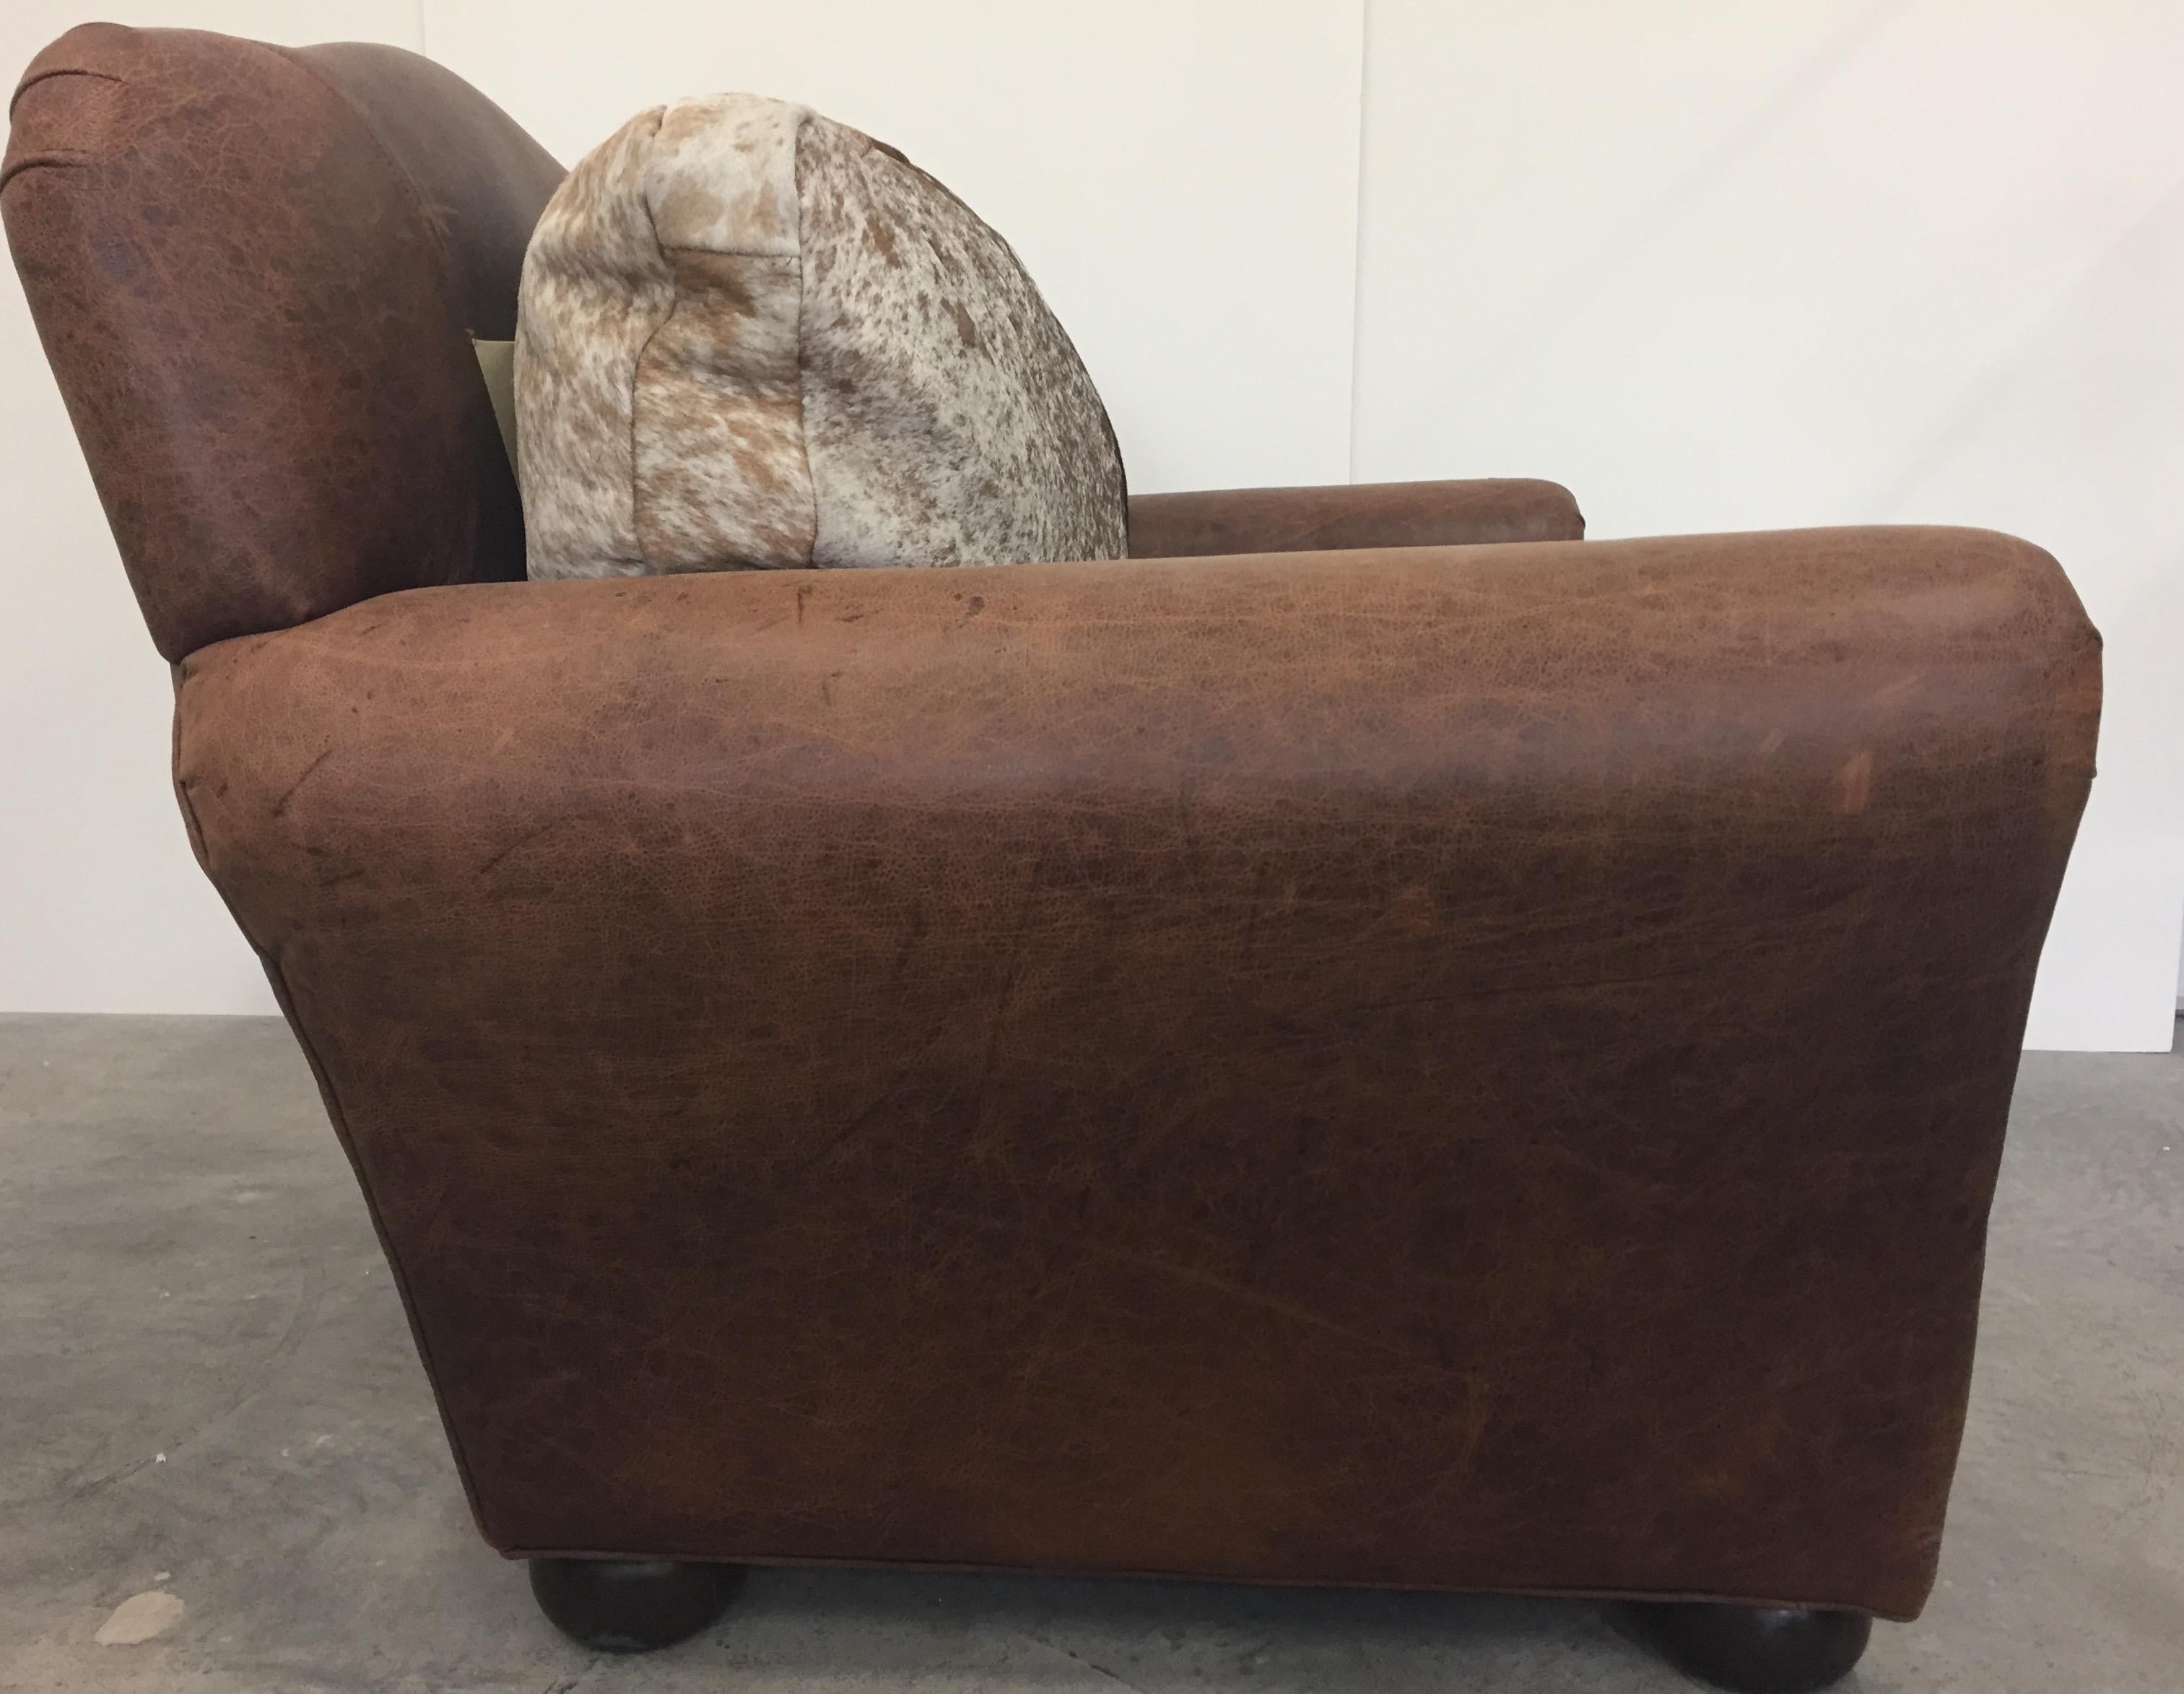 Masculine natural leather and cowhide club chair with nailhead details, roomy and super comfy.

Seat height 20 inches.